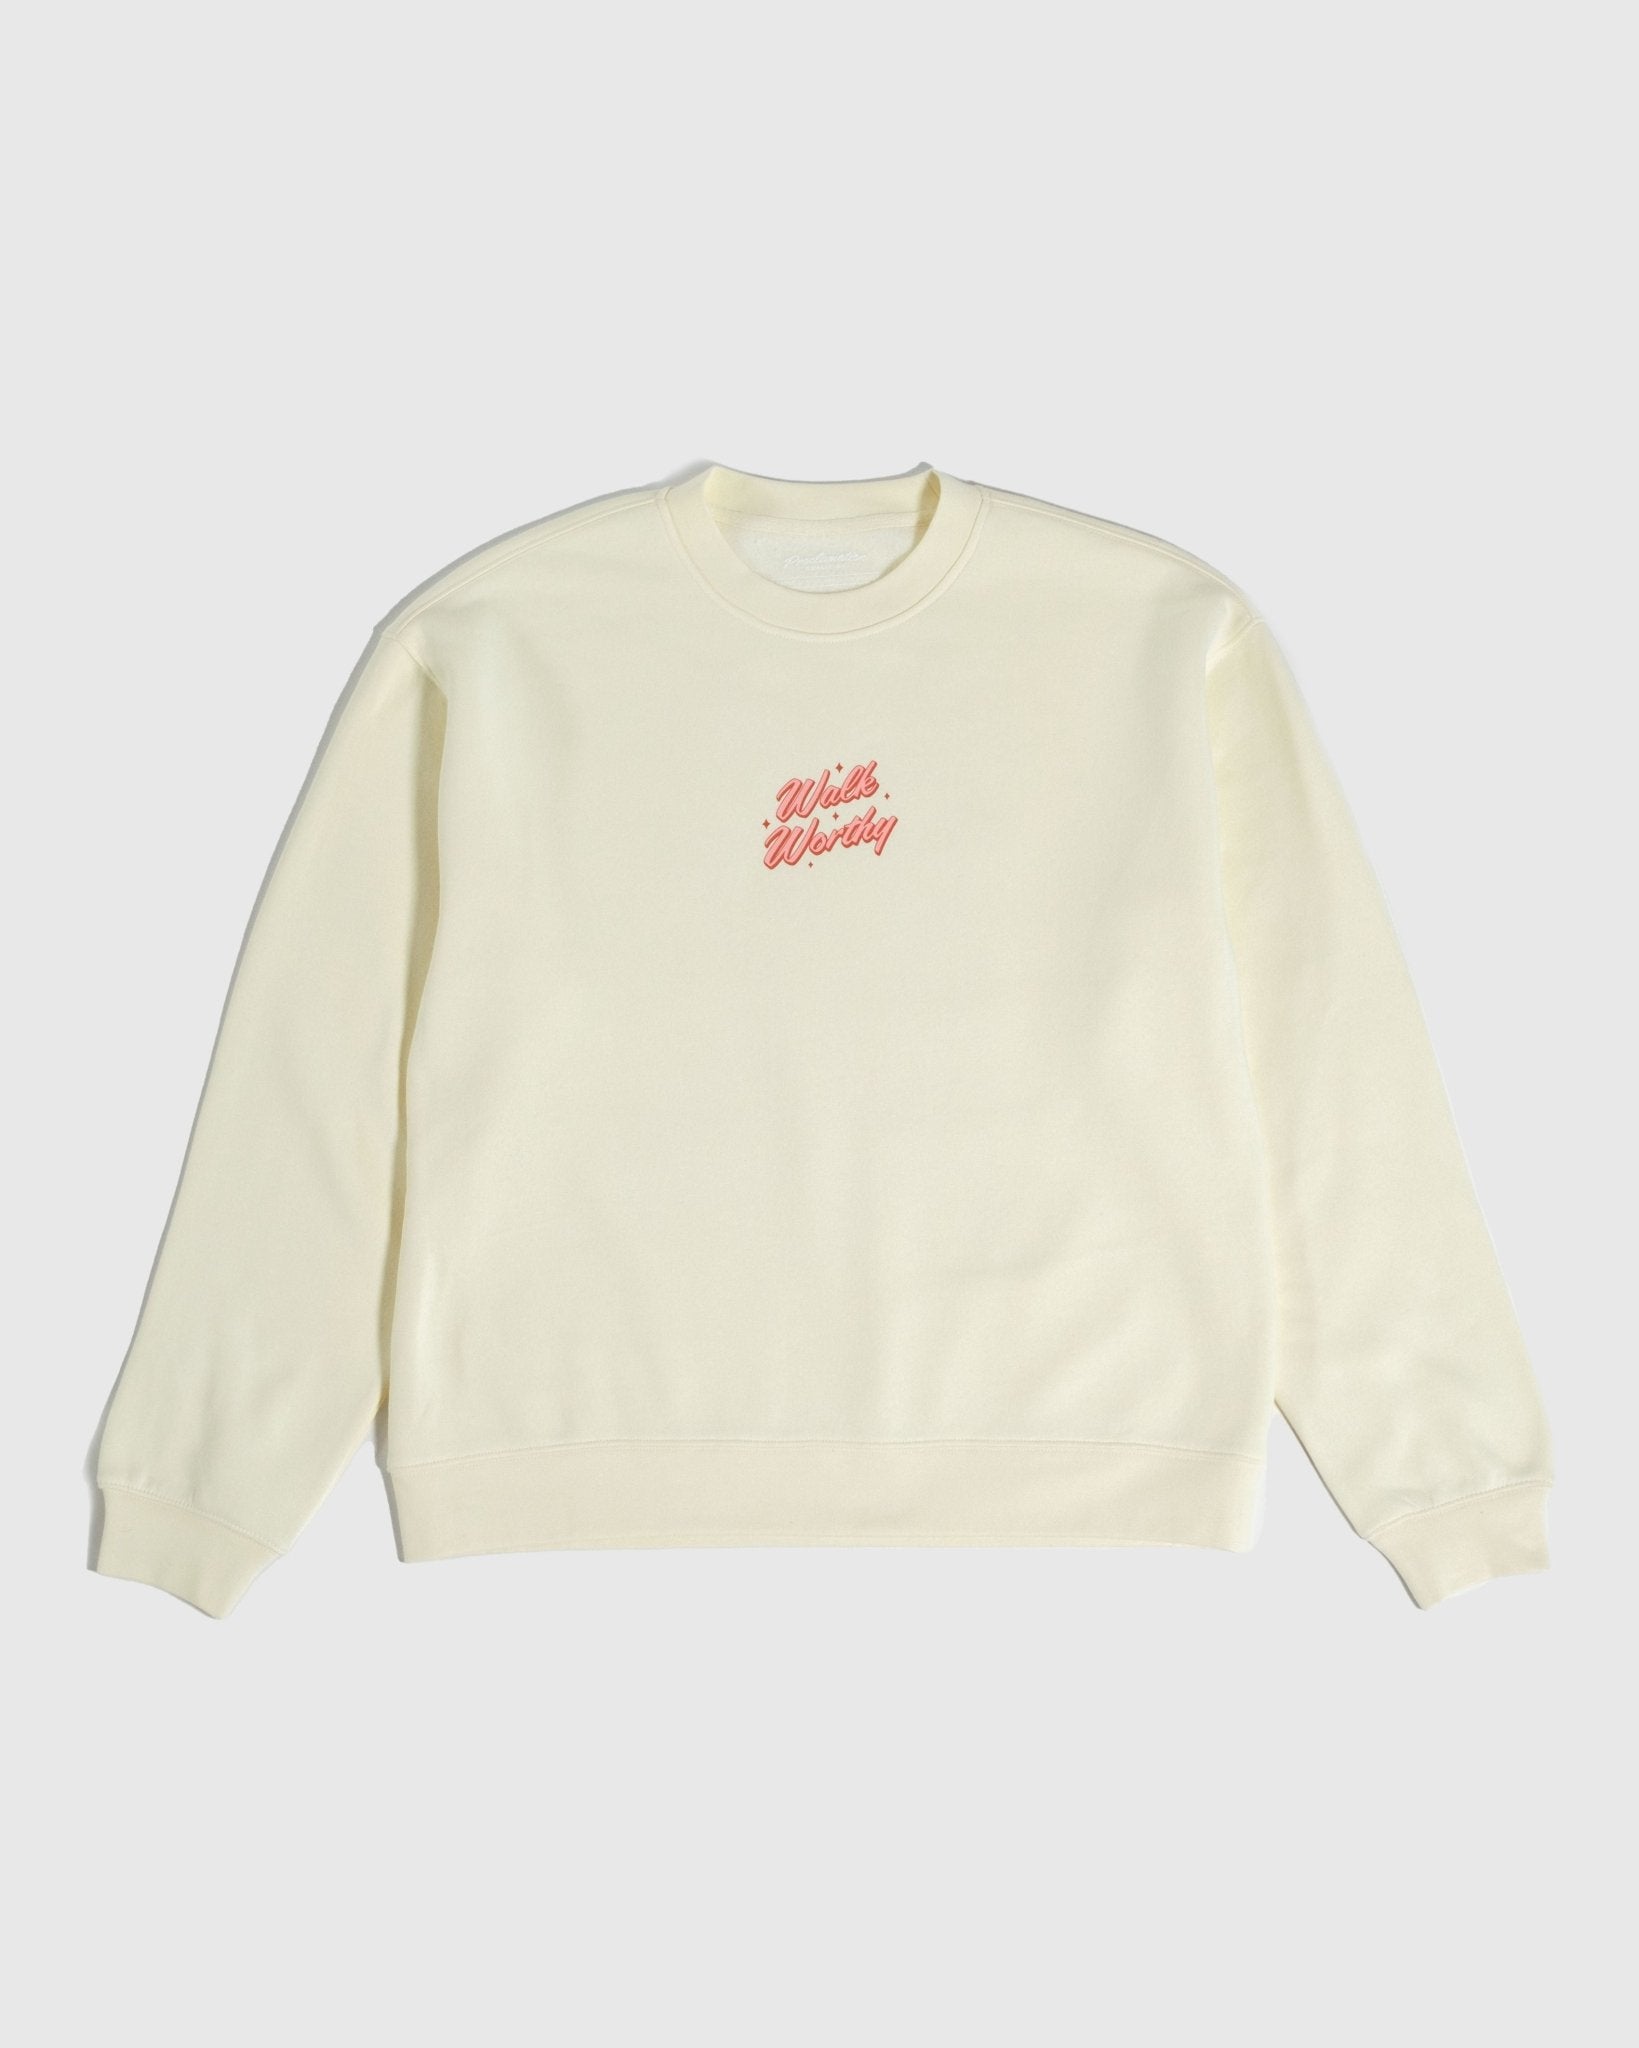 "Walk Worthy" Butter Relaxed Crewneck - Proclamation Coalition